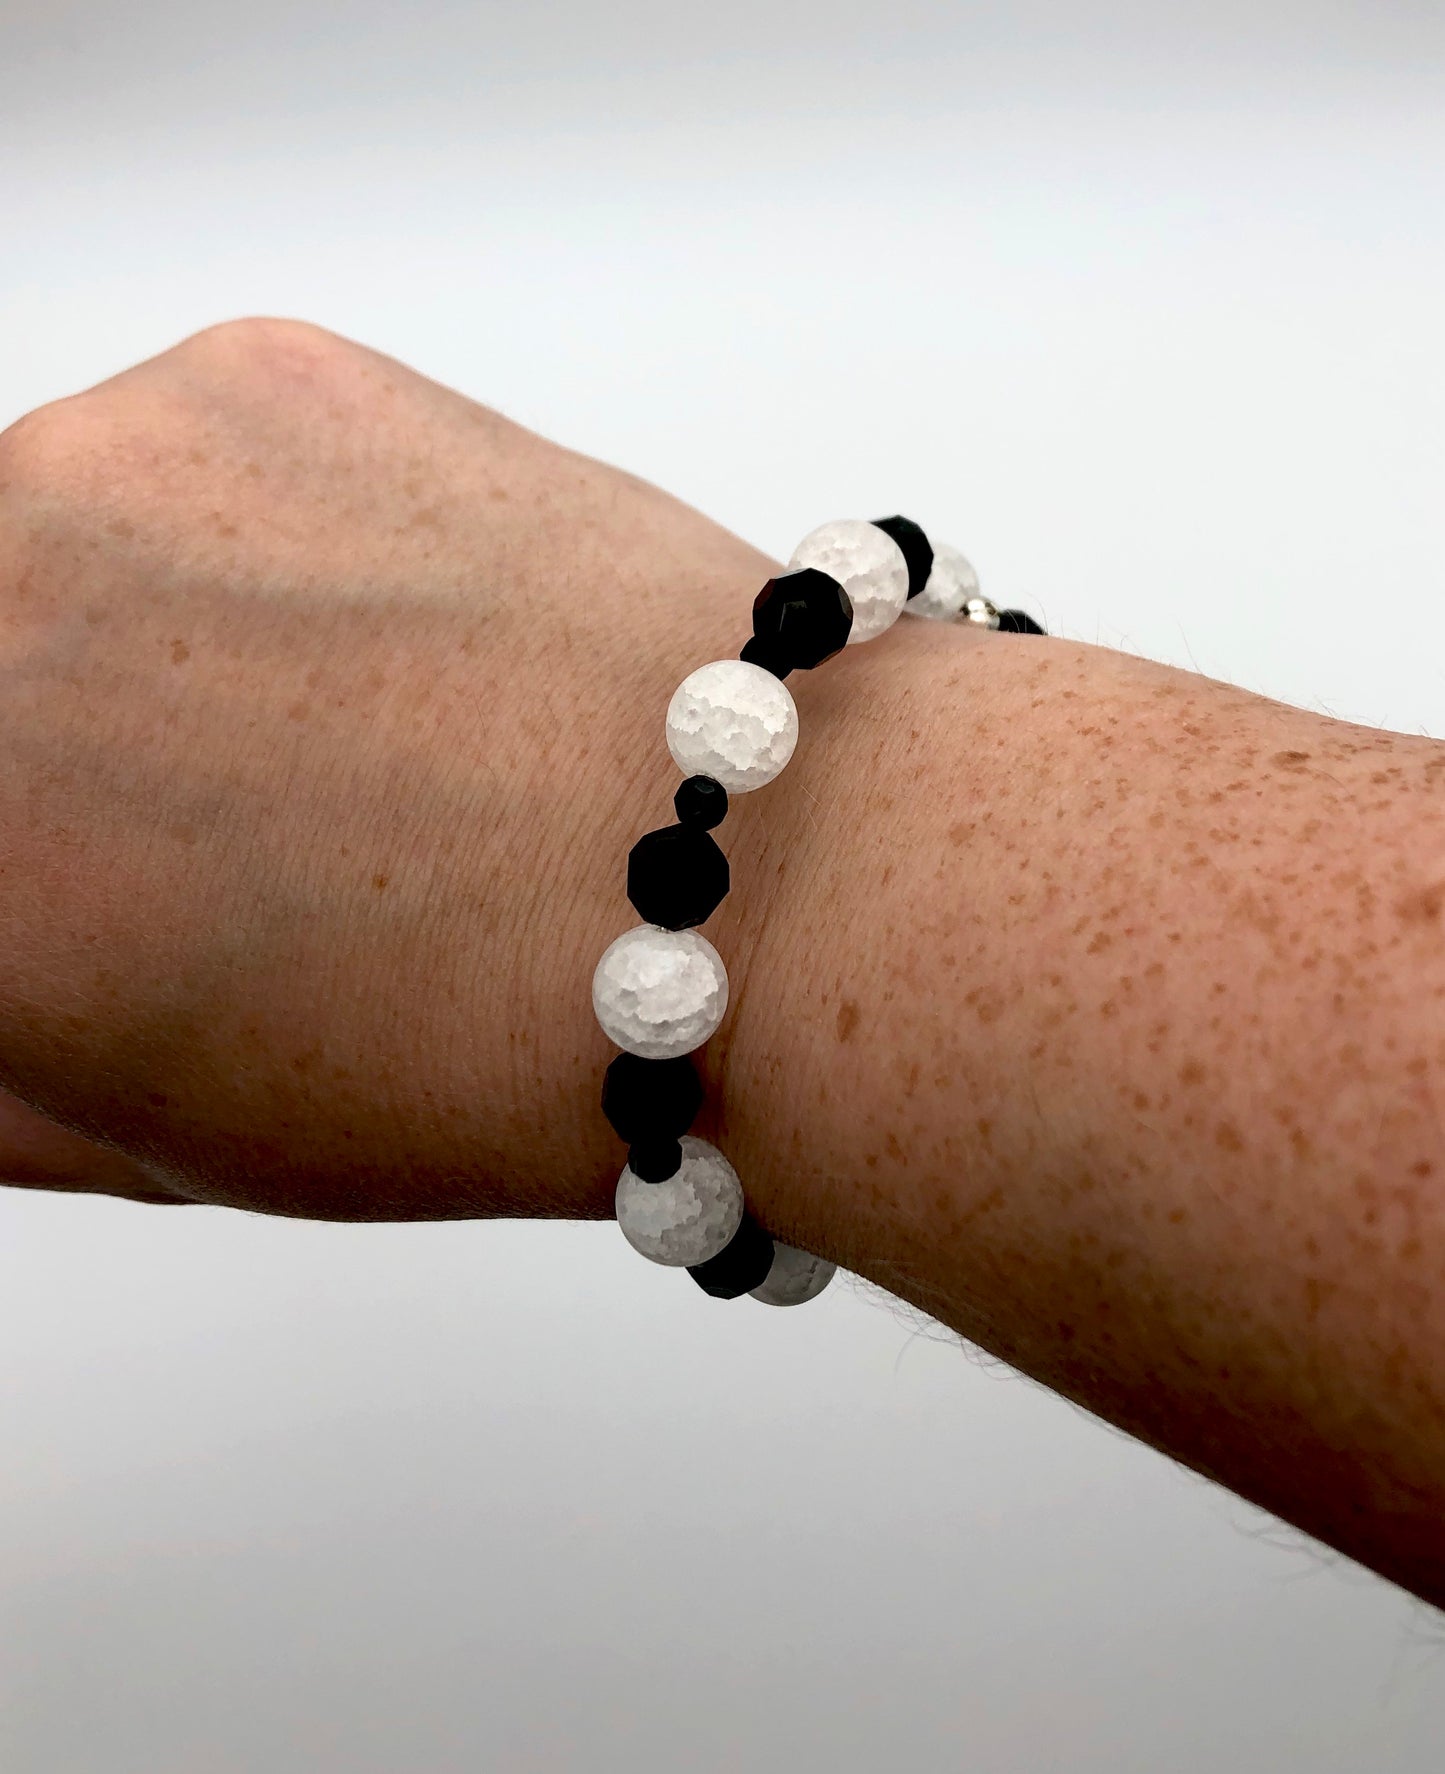 Black faceted bead and white crackle bead memory wire bracelet